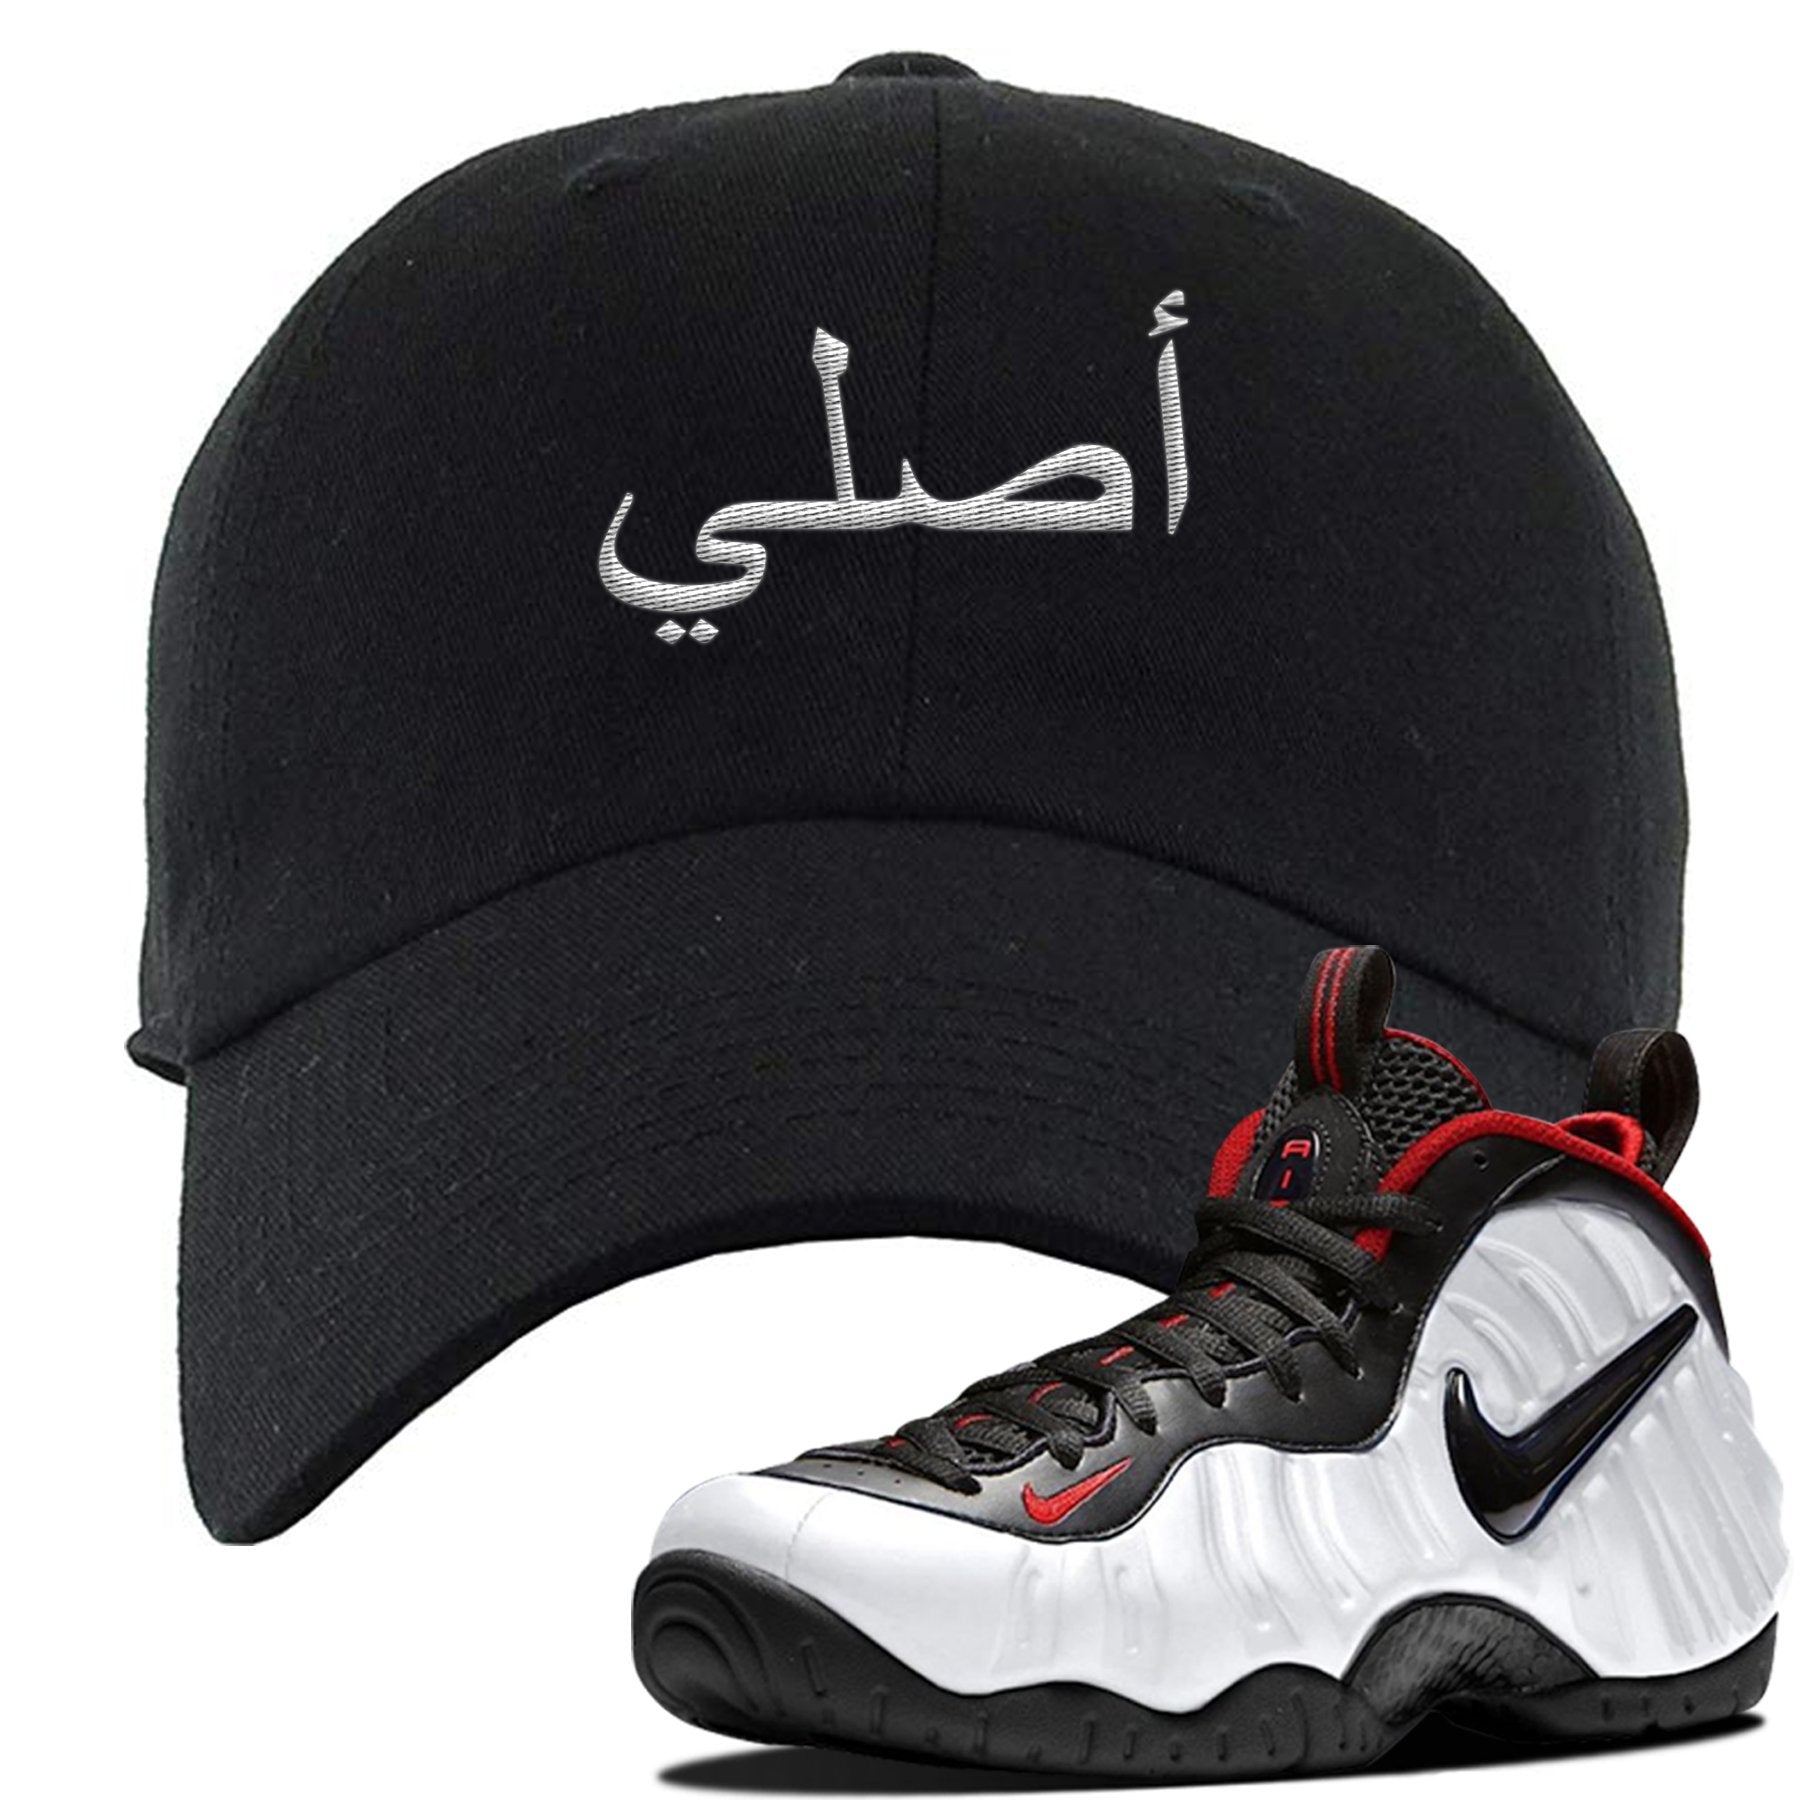 Foamposite Pro White Black University Red Sneaker Black Dad Hat | Hat to match Nike Air Foamposite Pro White Black University Red Shoes | Original Arabic